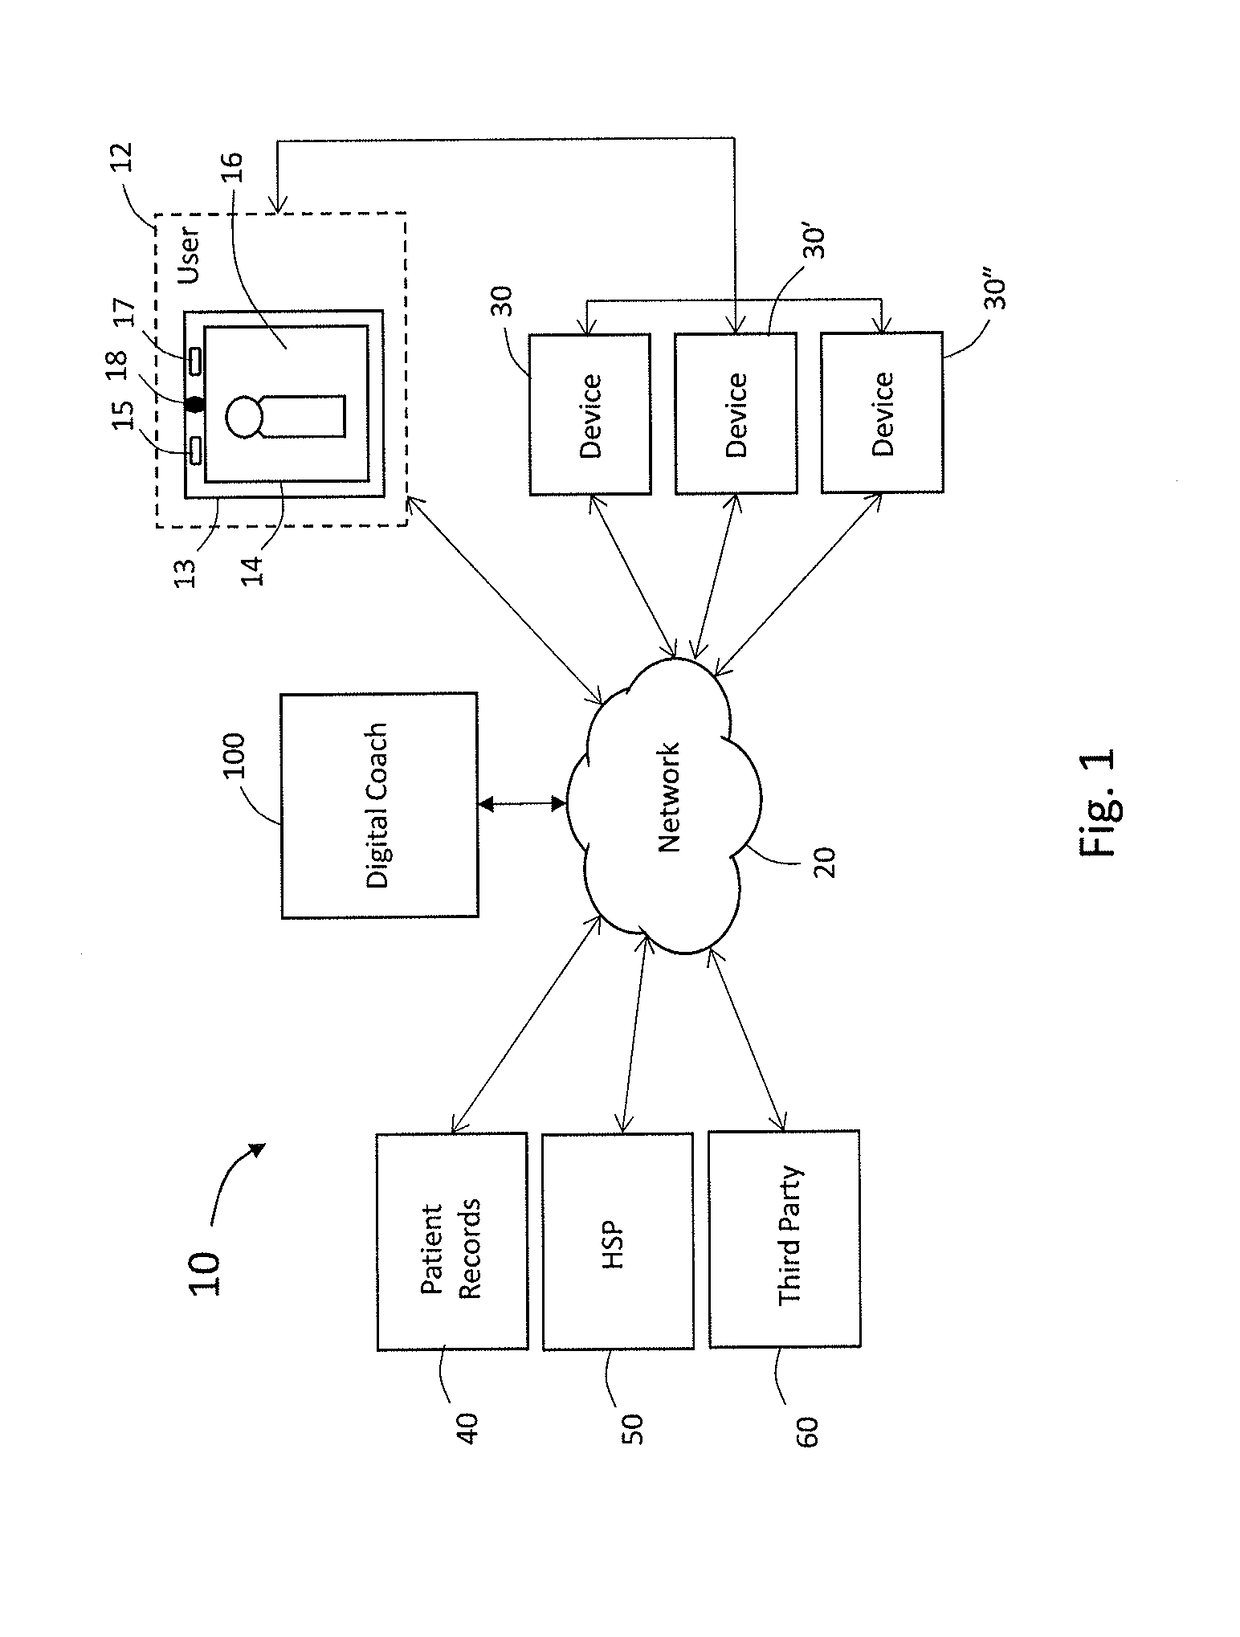 System and Method for Synthetic Interaction with User and Devices